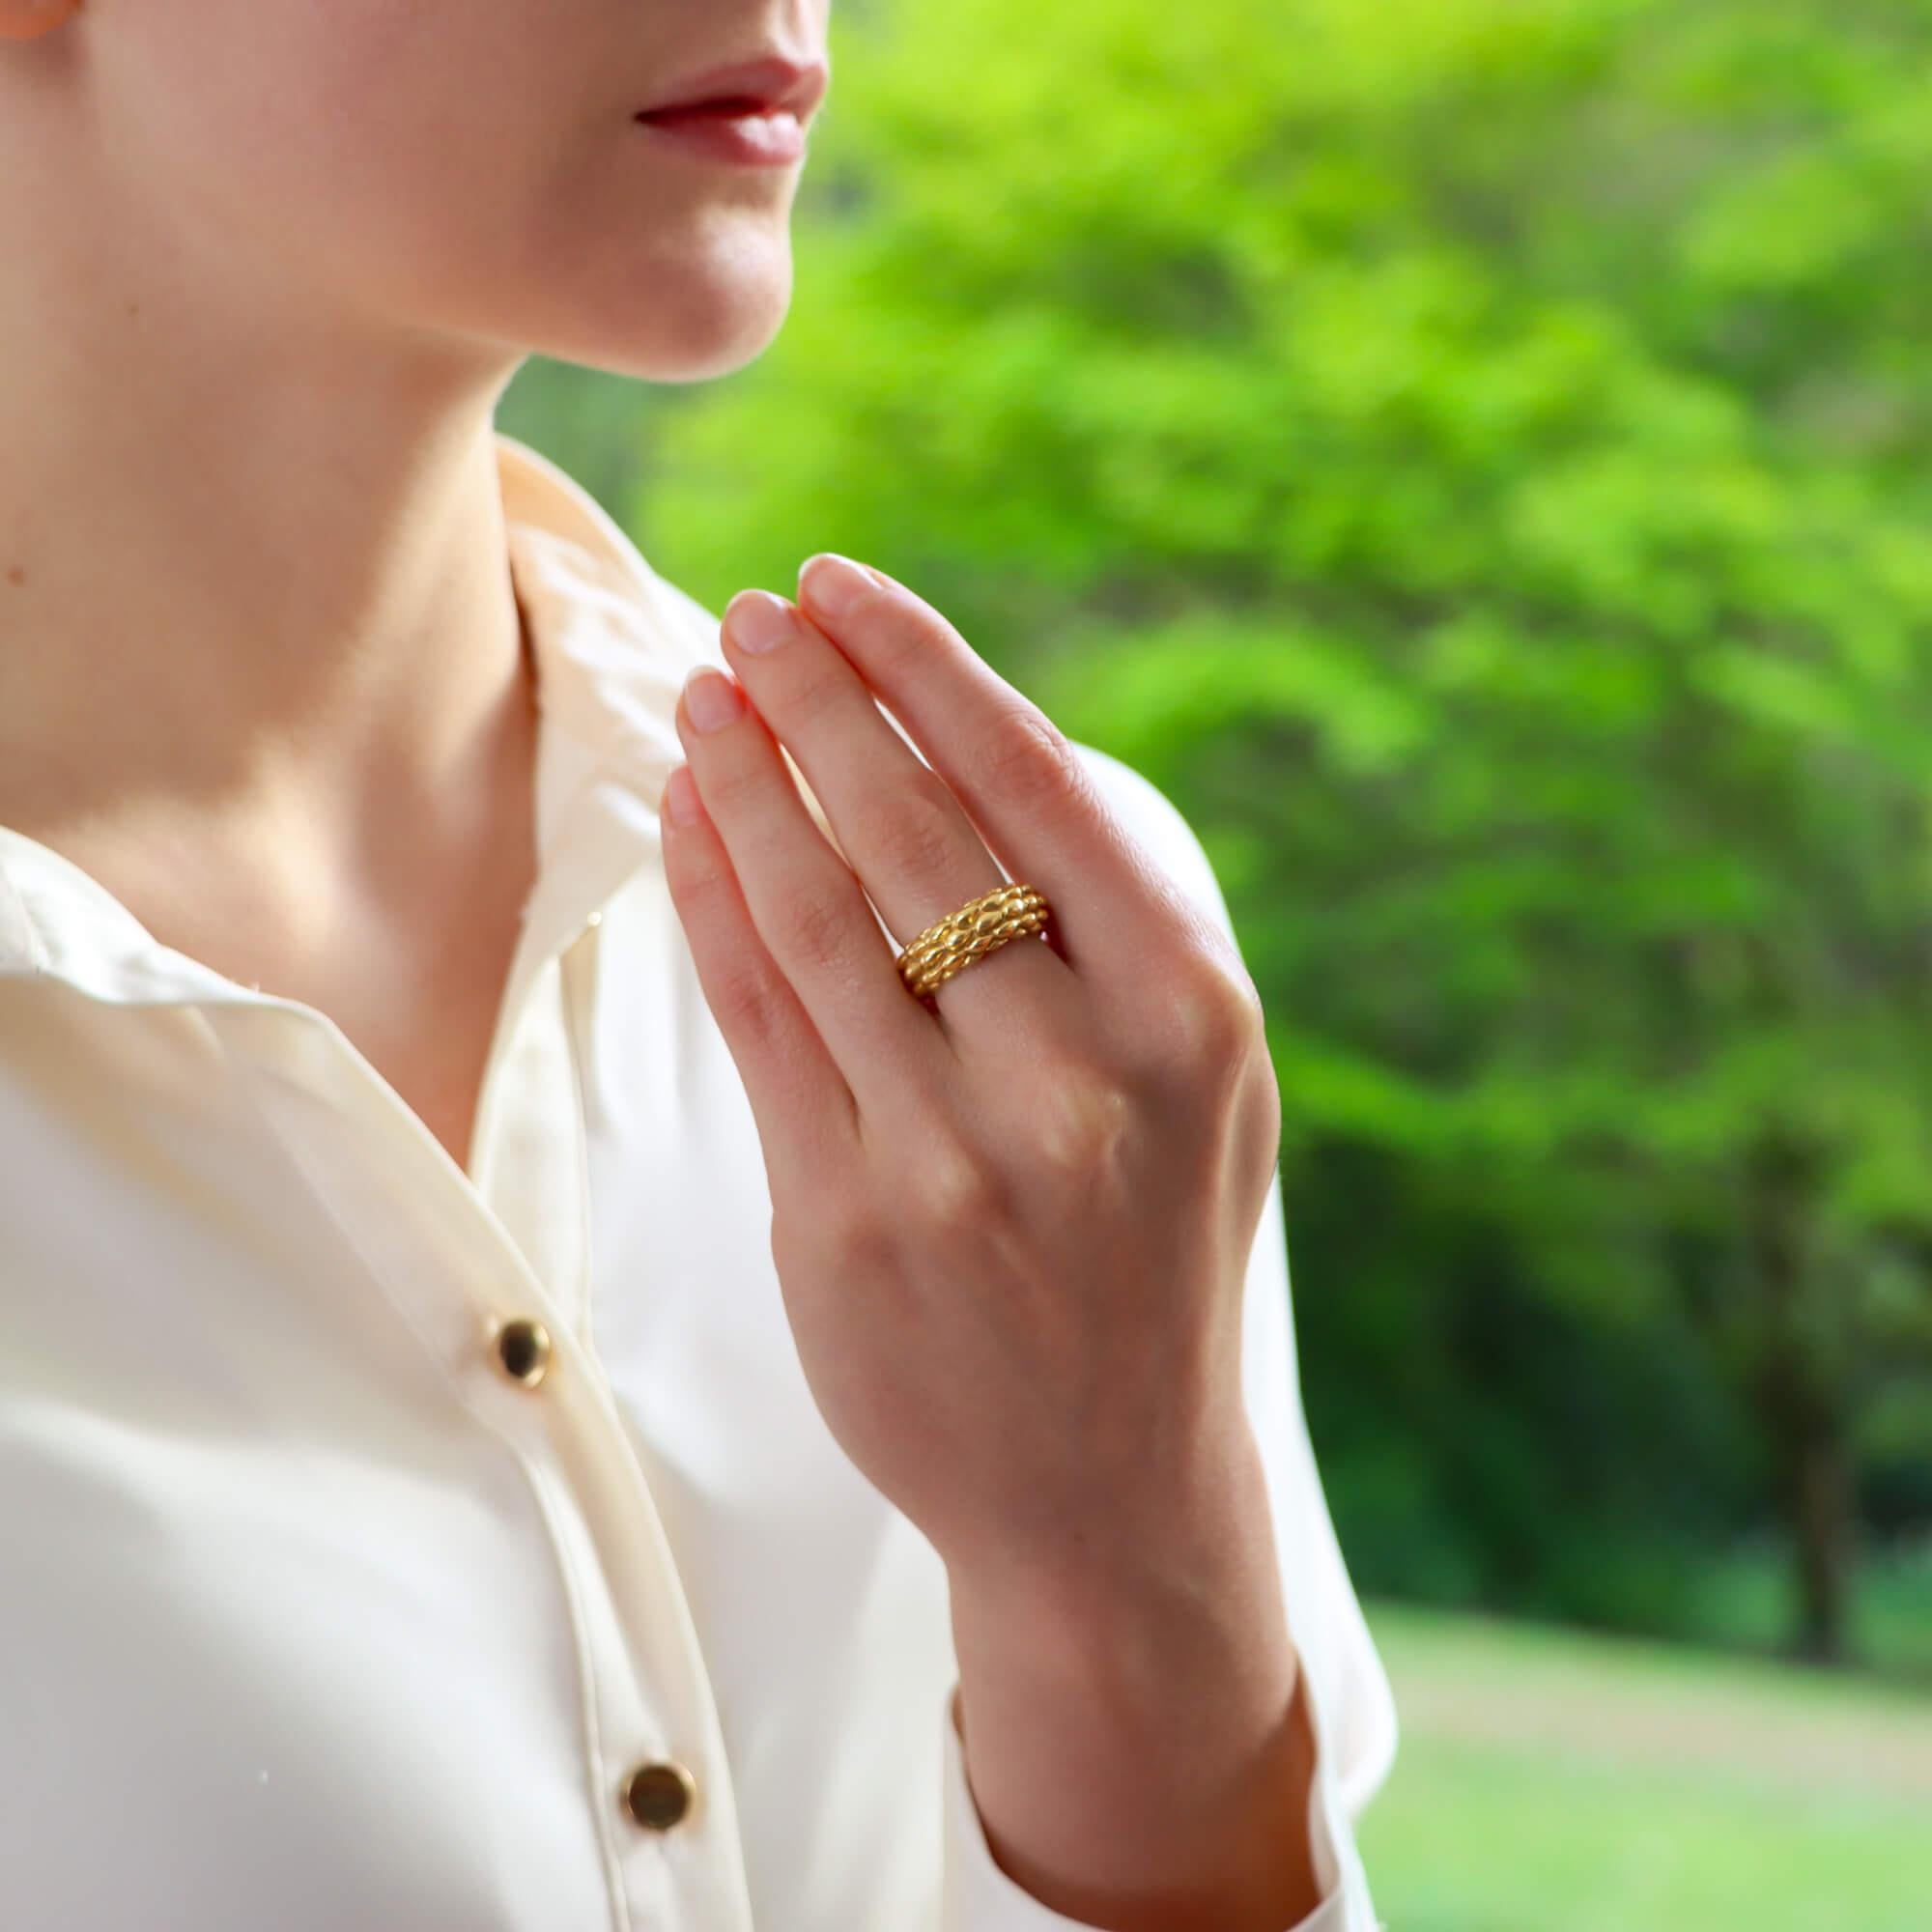  A stylish vintage Chaumet 'Oat' ring set in 18k yellow gold.

From the now discontinued Oat collection, the ring is composed in a randomized sequence of oat motifs and beautifully travels around the entirety of the finger. 

Due to the design and